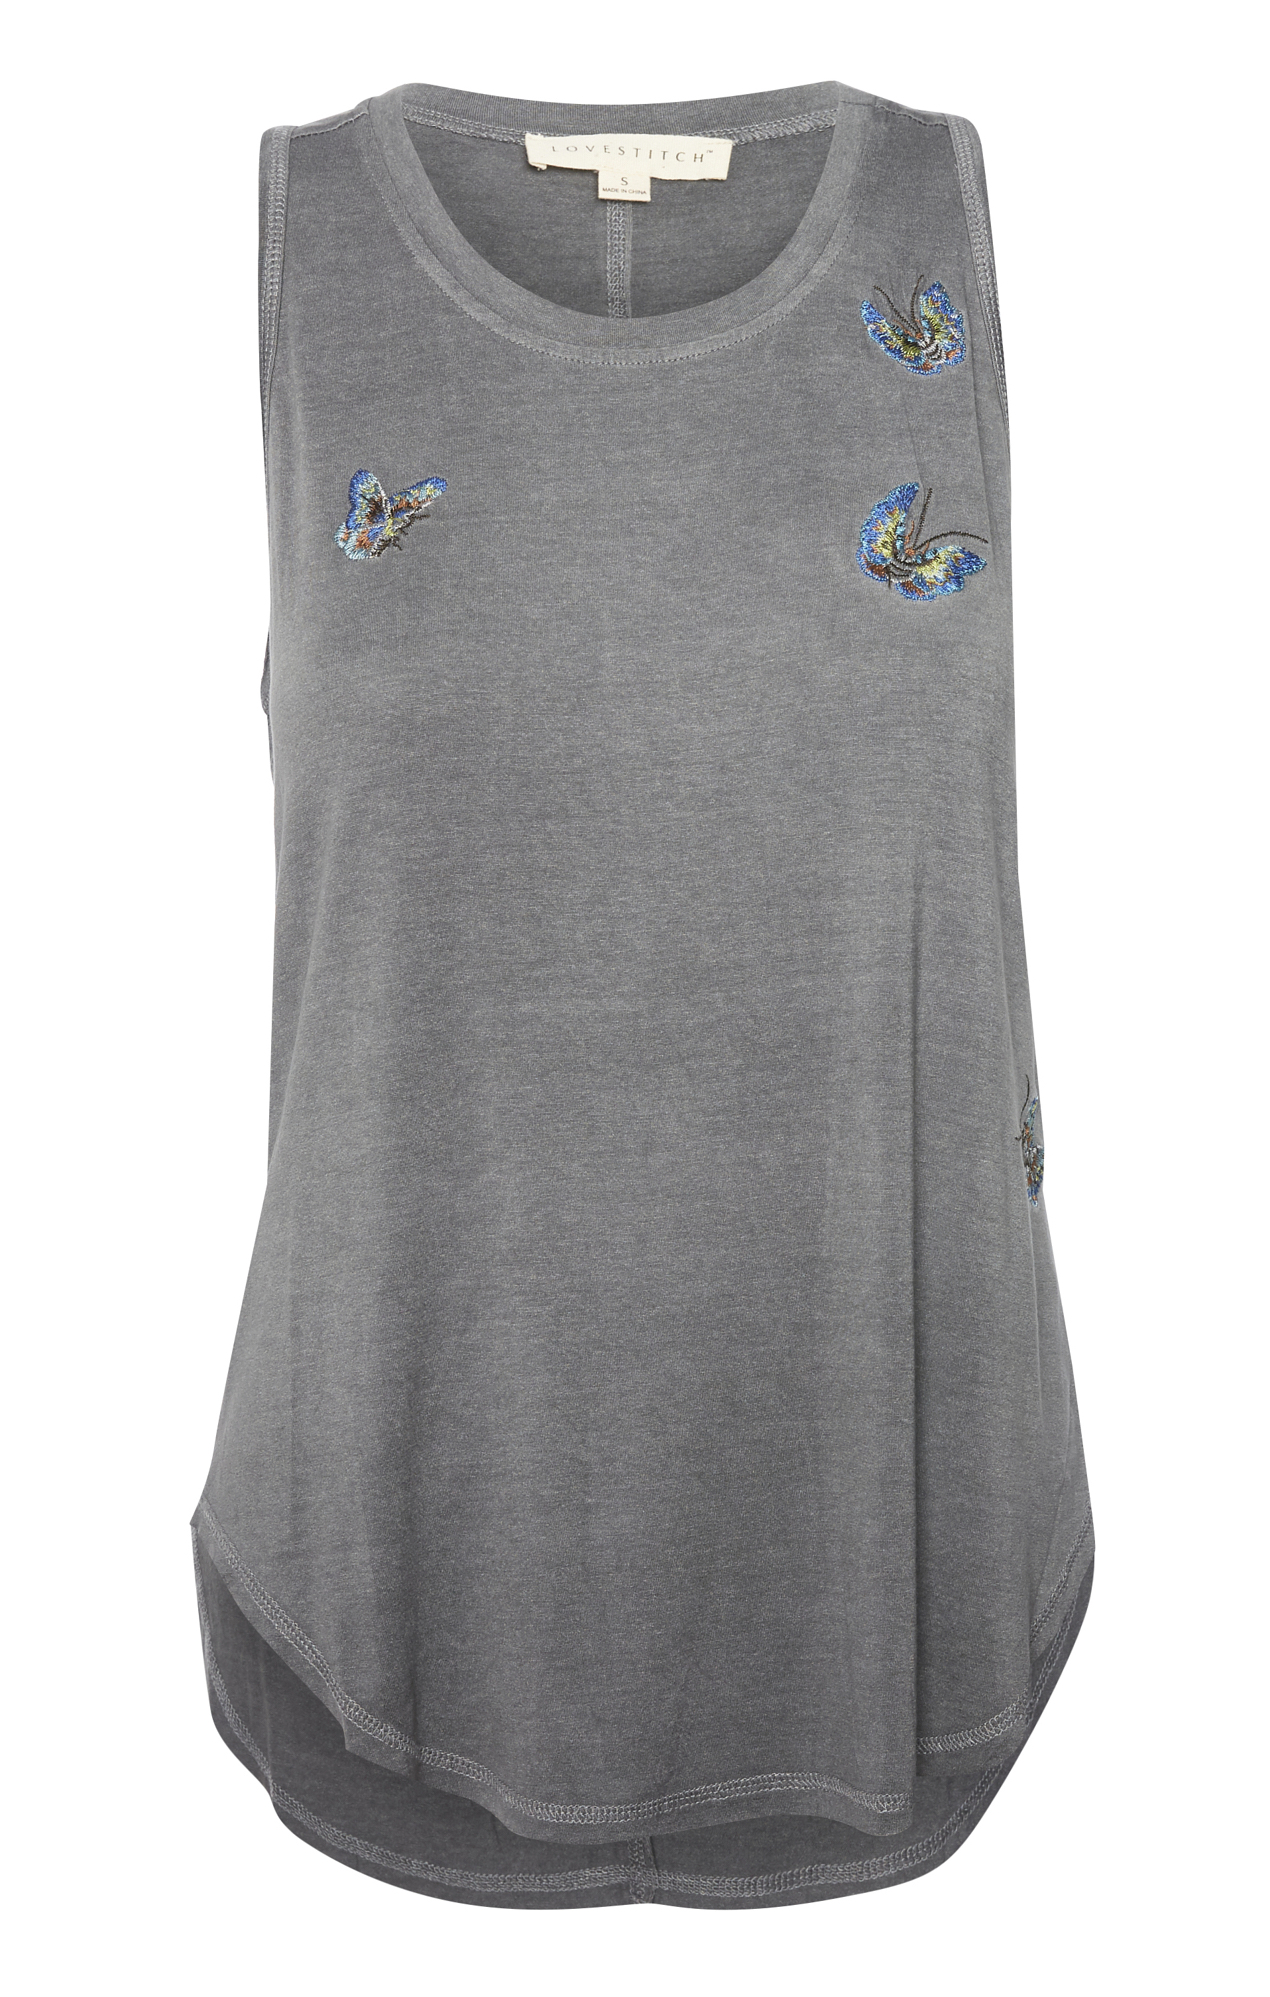 Embroidered Racer Back Tank